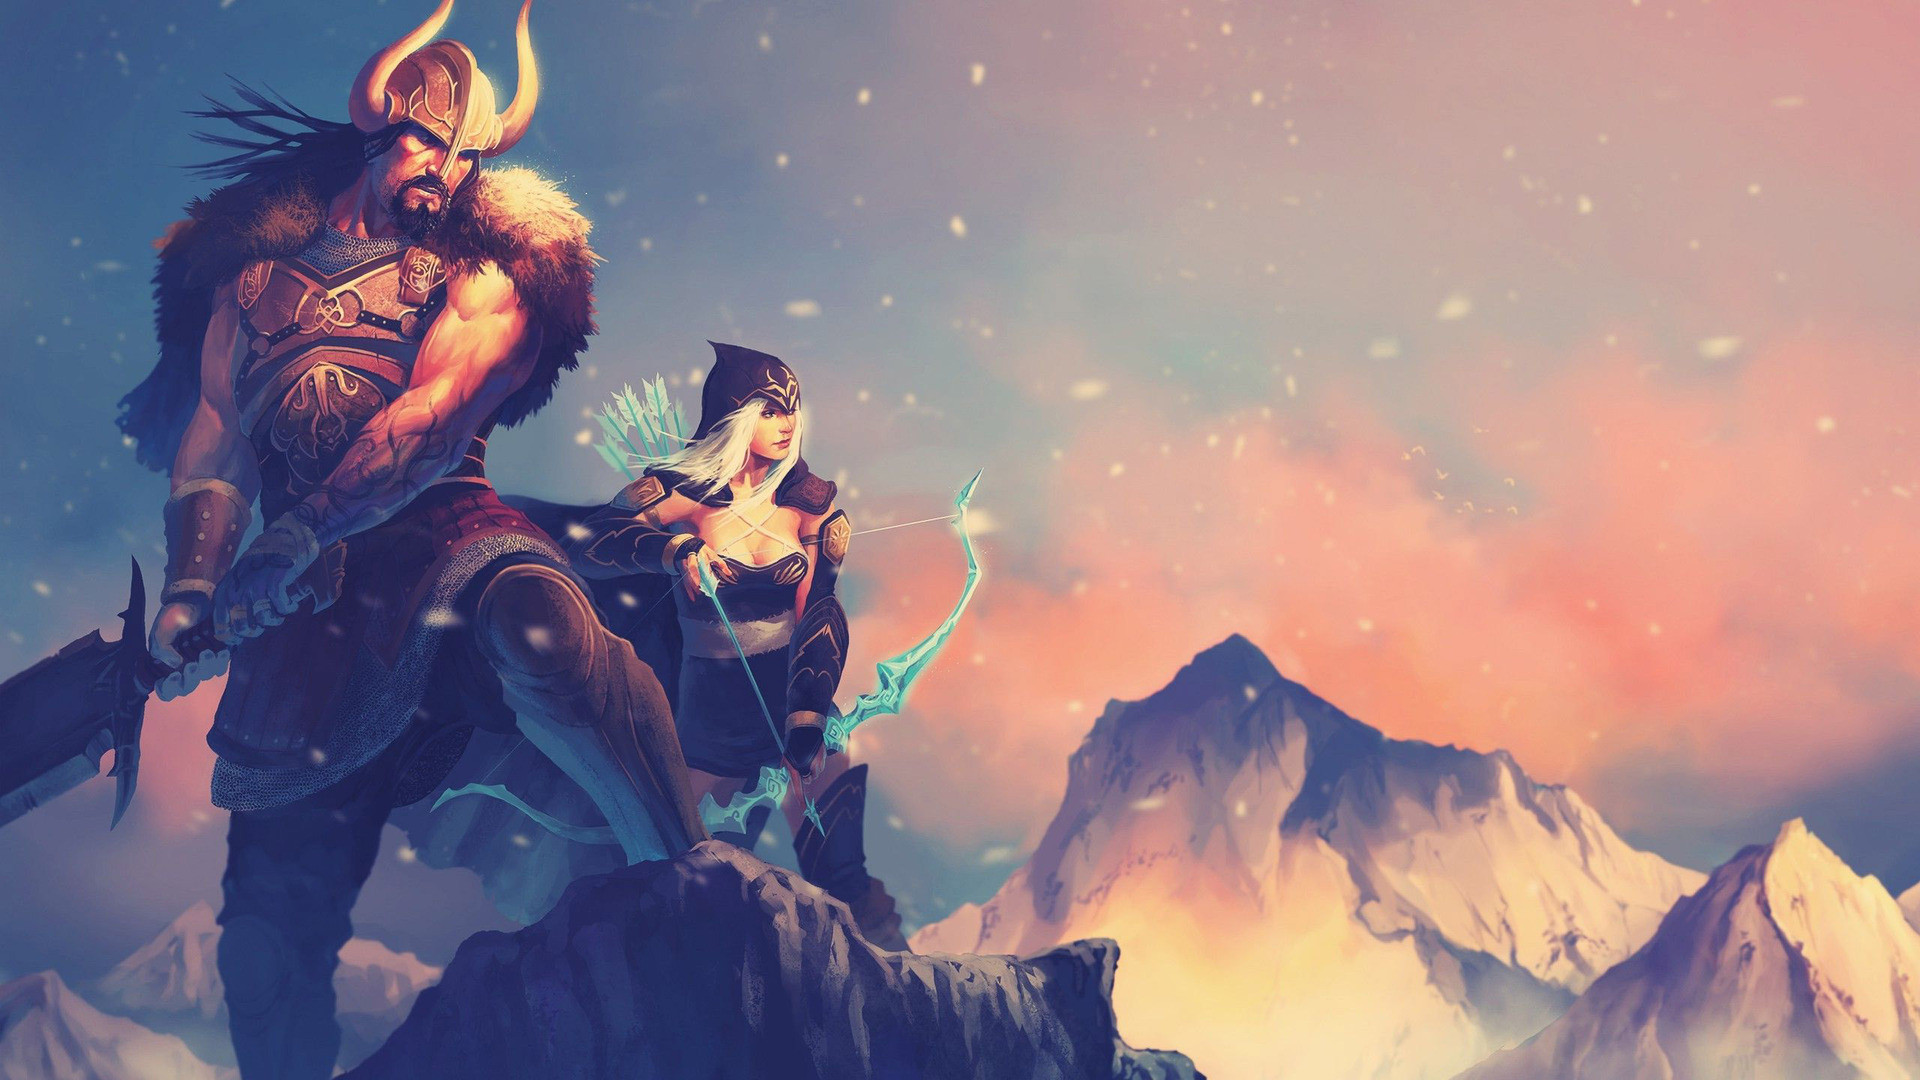 1920x1080 Tryndamere and Ashe - League of Legends HD Wallpaper  Tryndamere  ...